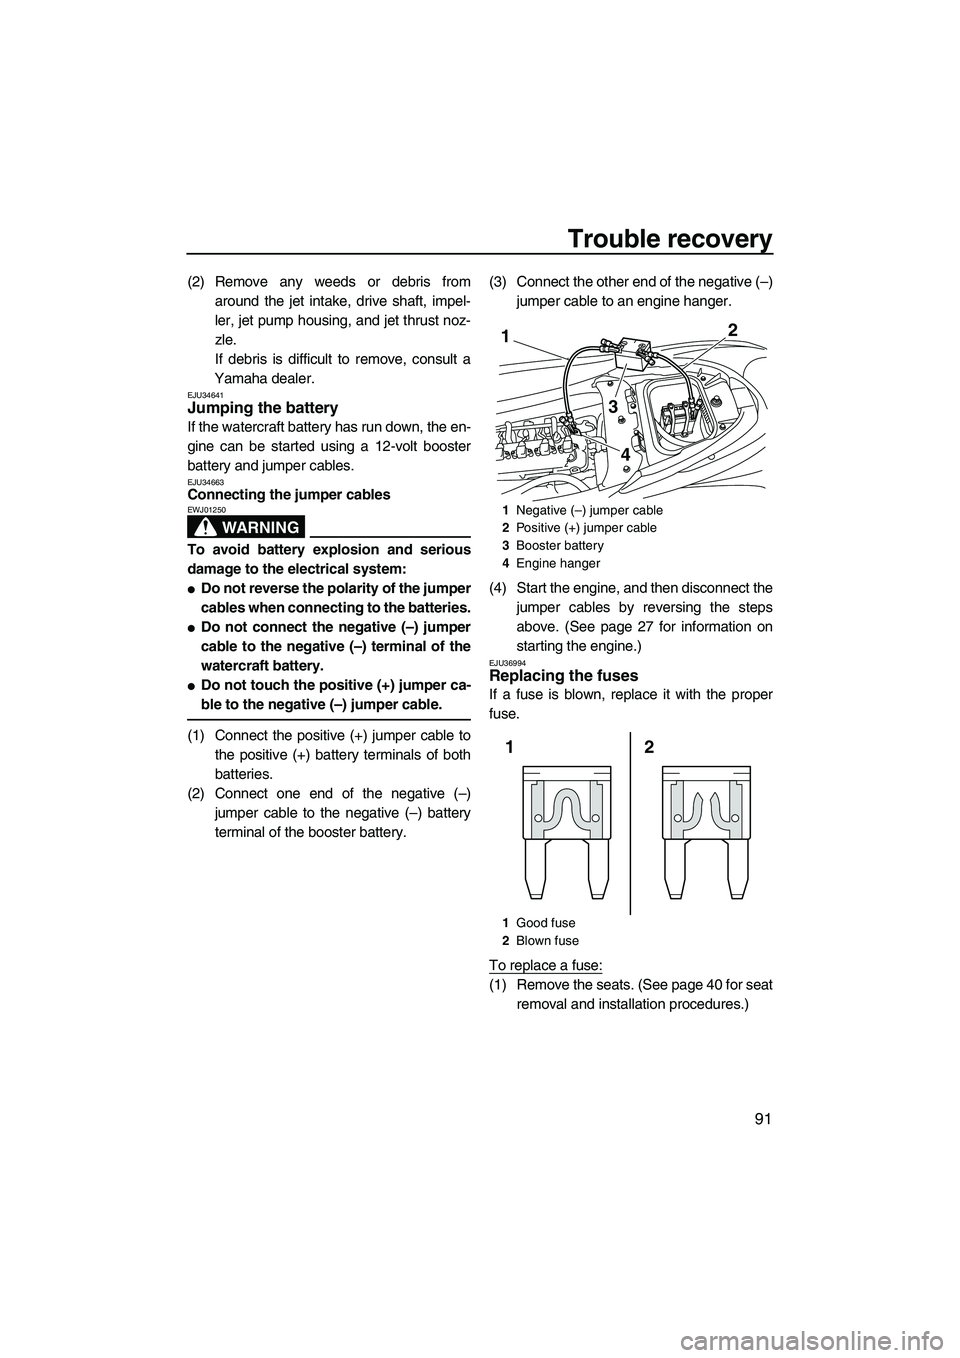 YAMAHA FZR 2012 Owners Guide Trouble recovery
91
(2) Remove any weeds or debris from
around the jet intake, drive shaft, impel-
ler, jet pump housing, and jet thrust noz-
zle.
If debris is difficult to remove, consult a
Yamaha de